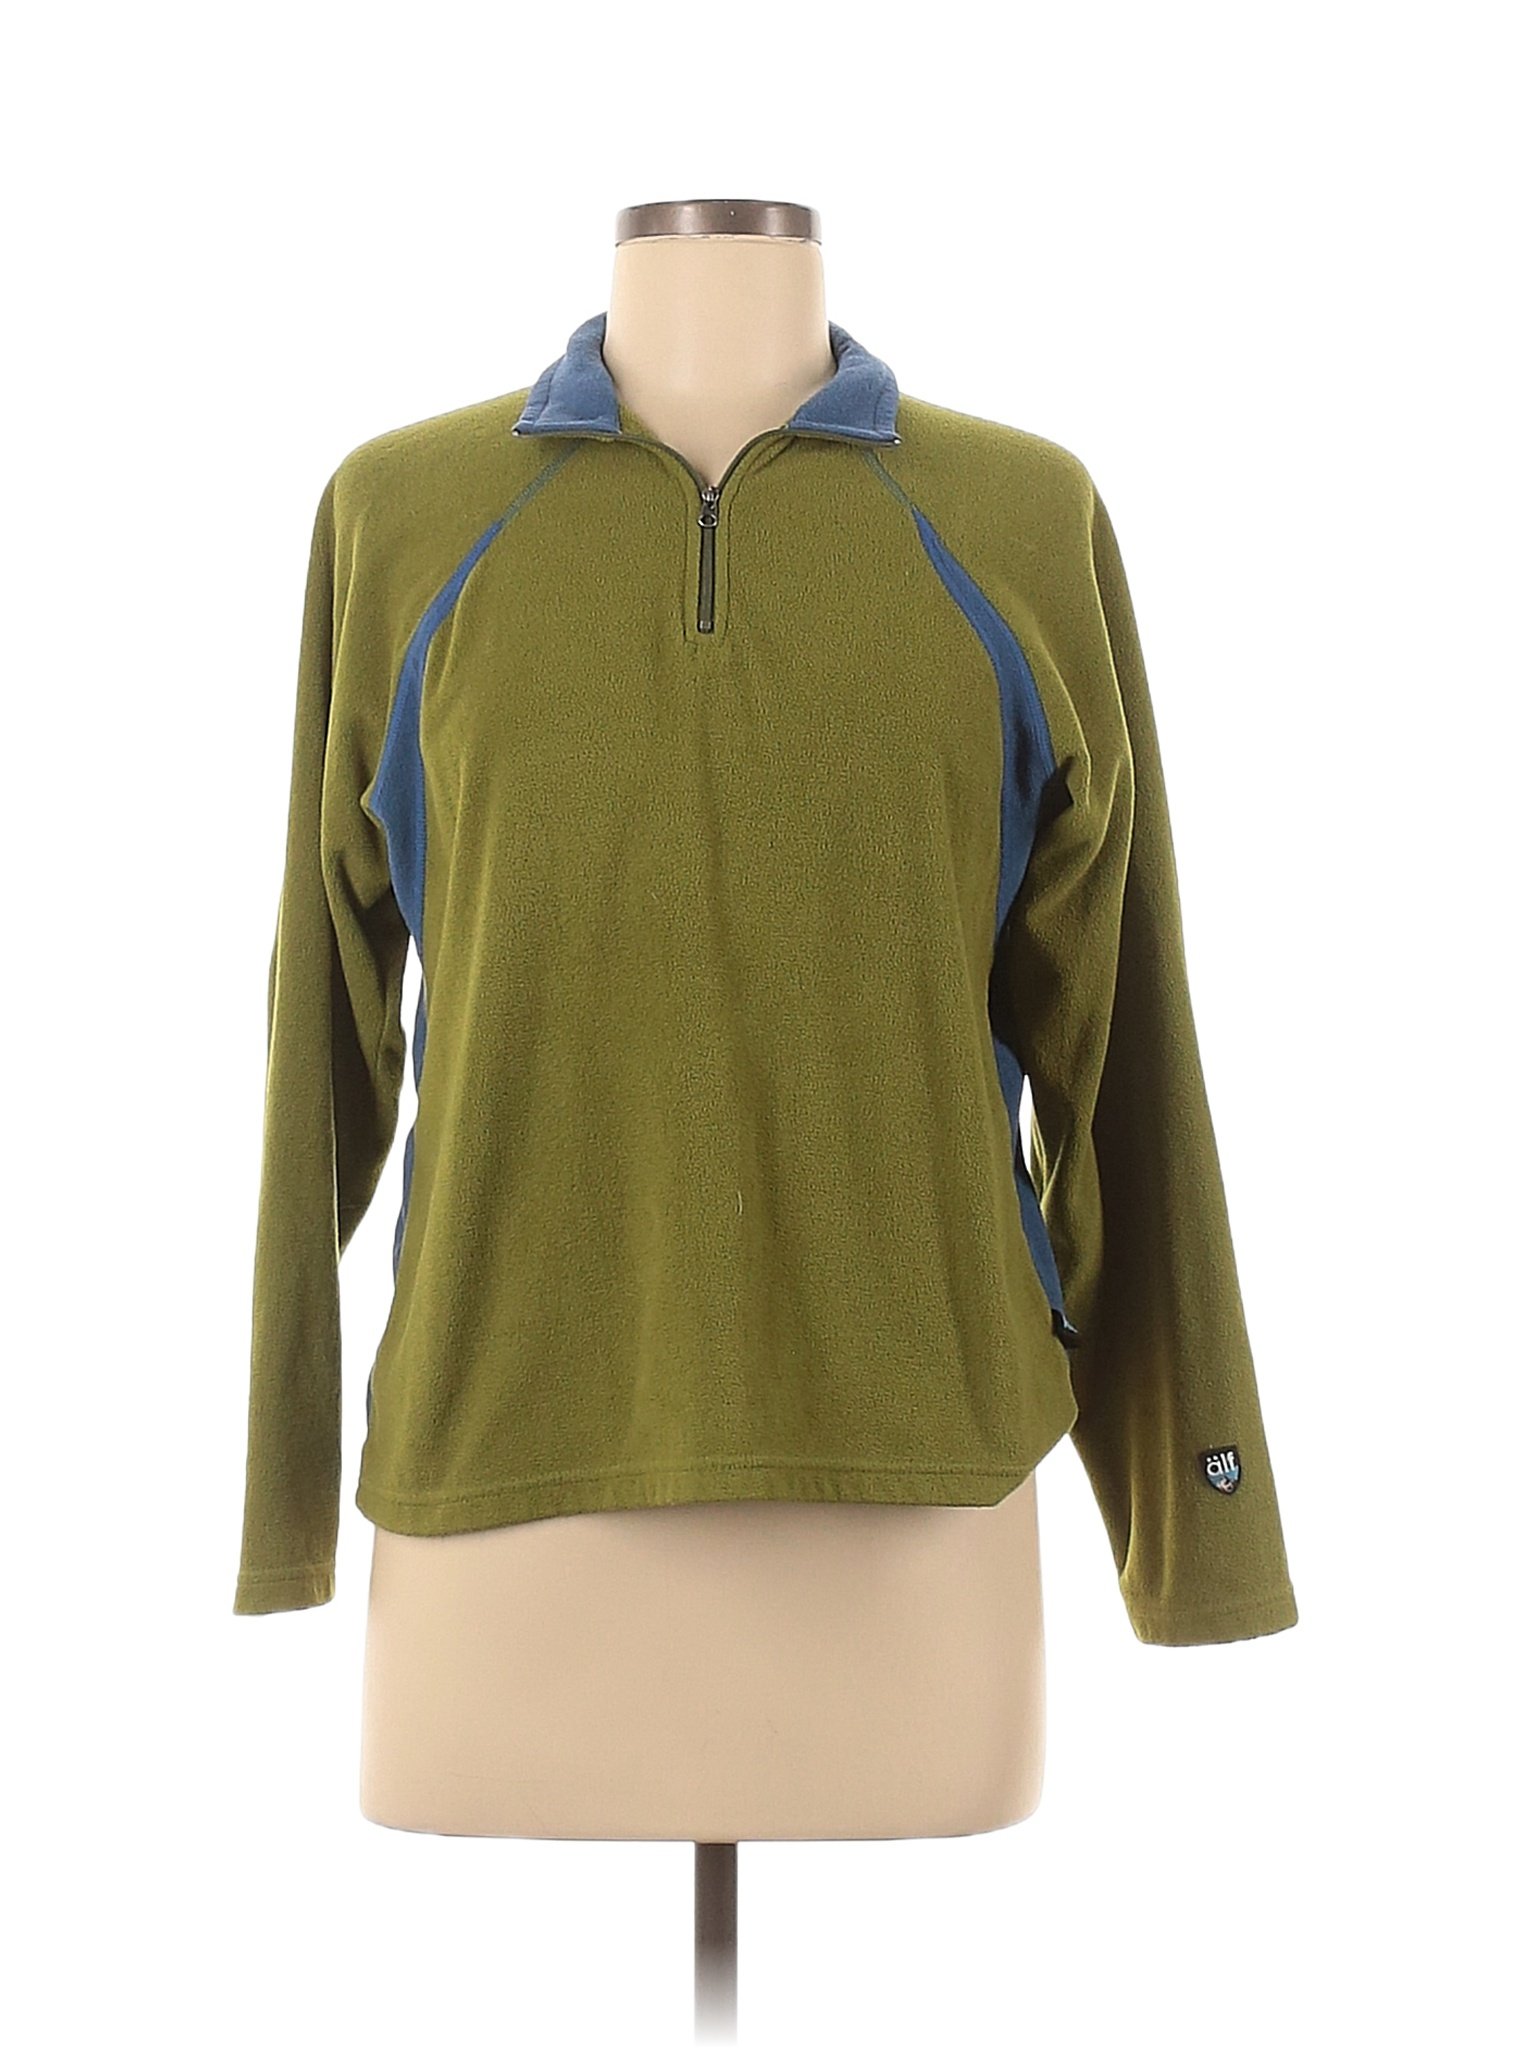 Alf 100% Polyester Colored Green Fleece Size M - 85% off